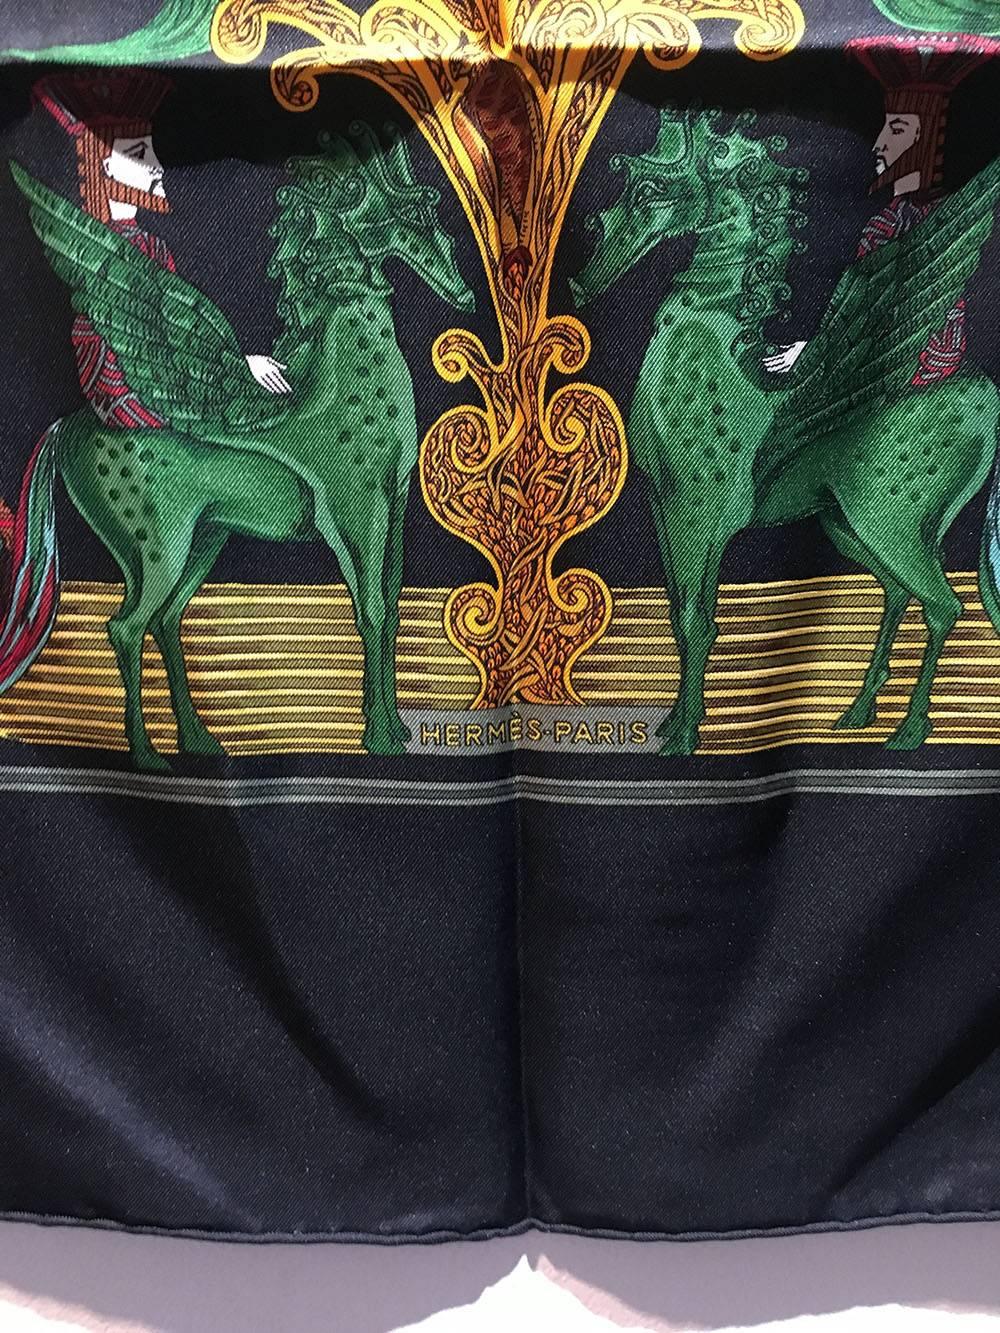 STUNNING Hermes Au Fin de la Soie Silk Scarf in Black in excellent condition.  Original silk screen design c1995 by Annie Faivre features an assortment of mythological creatures and plants in green, gold, and maroons over a black background.  100%